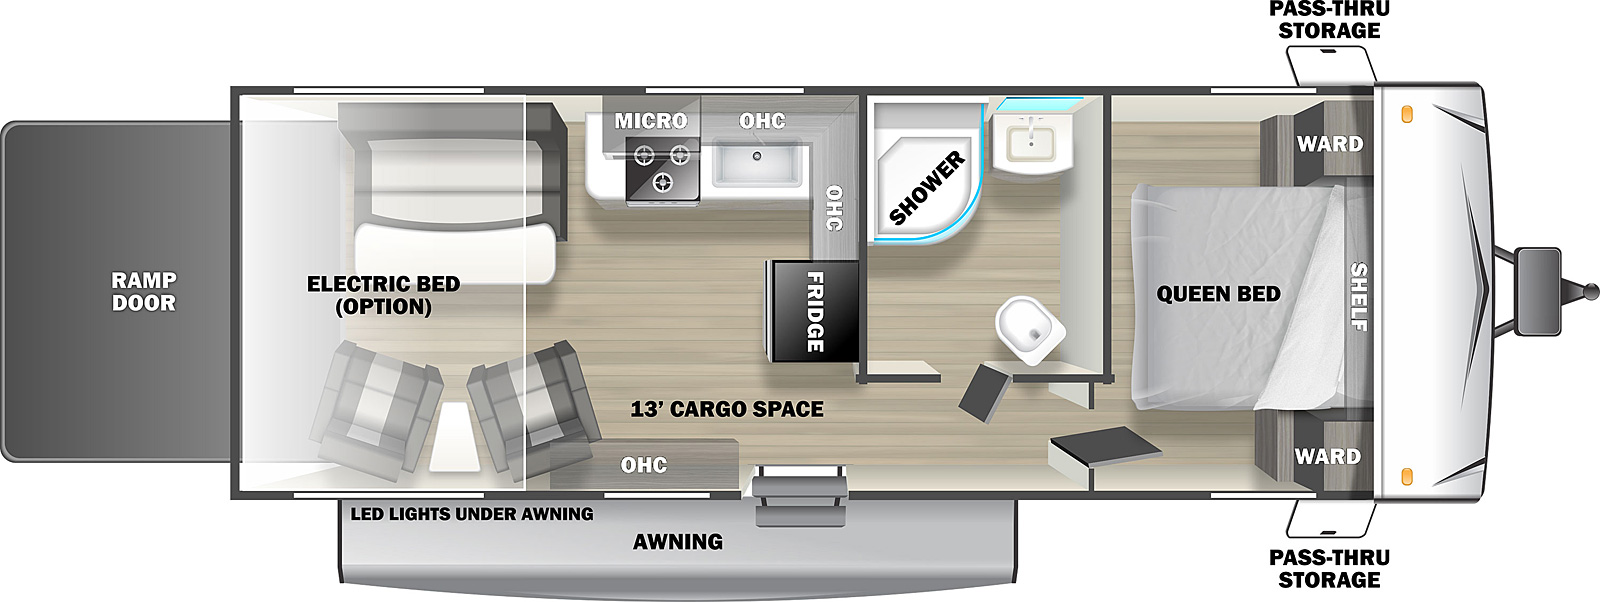 The Sandstorm 241 Toy Hauler has one entry door, a rear ramp door, and an electric awning. It has thirteen feet of cargo space. Pass through storage is near the front of the RV. The entry door opens into a living area on the left and a hallway on the right. Overhead storage is directly to the left of the entry door. To the left of the overhead storage are two chairs with a table between them. A ramp door makes up the rear wall of the RV. Opposite the chairs is a flip sofa with a table. A kitchen area is in the front off door corner of the living area. The kitchen area has an L shaped counter top against the off door and front walls of the living area. In he off door section of the countertop are a stove and a sink. A microwave is above the stove and overhead storage is above the sink. Overhead storage is above the countertop against the front wall. A refrigerator is in the front center of the living area. A hallway is to the right of the entry door. A door on the left of the hallway leads to a bathroom. The bathroom has a shower, a sink, and a toilet. 